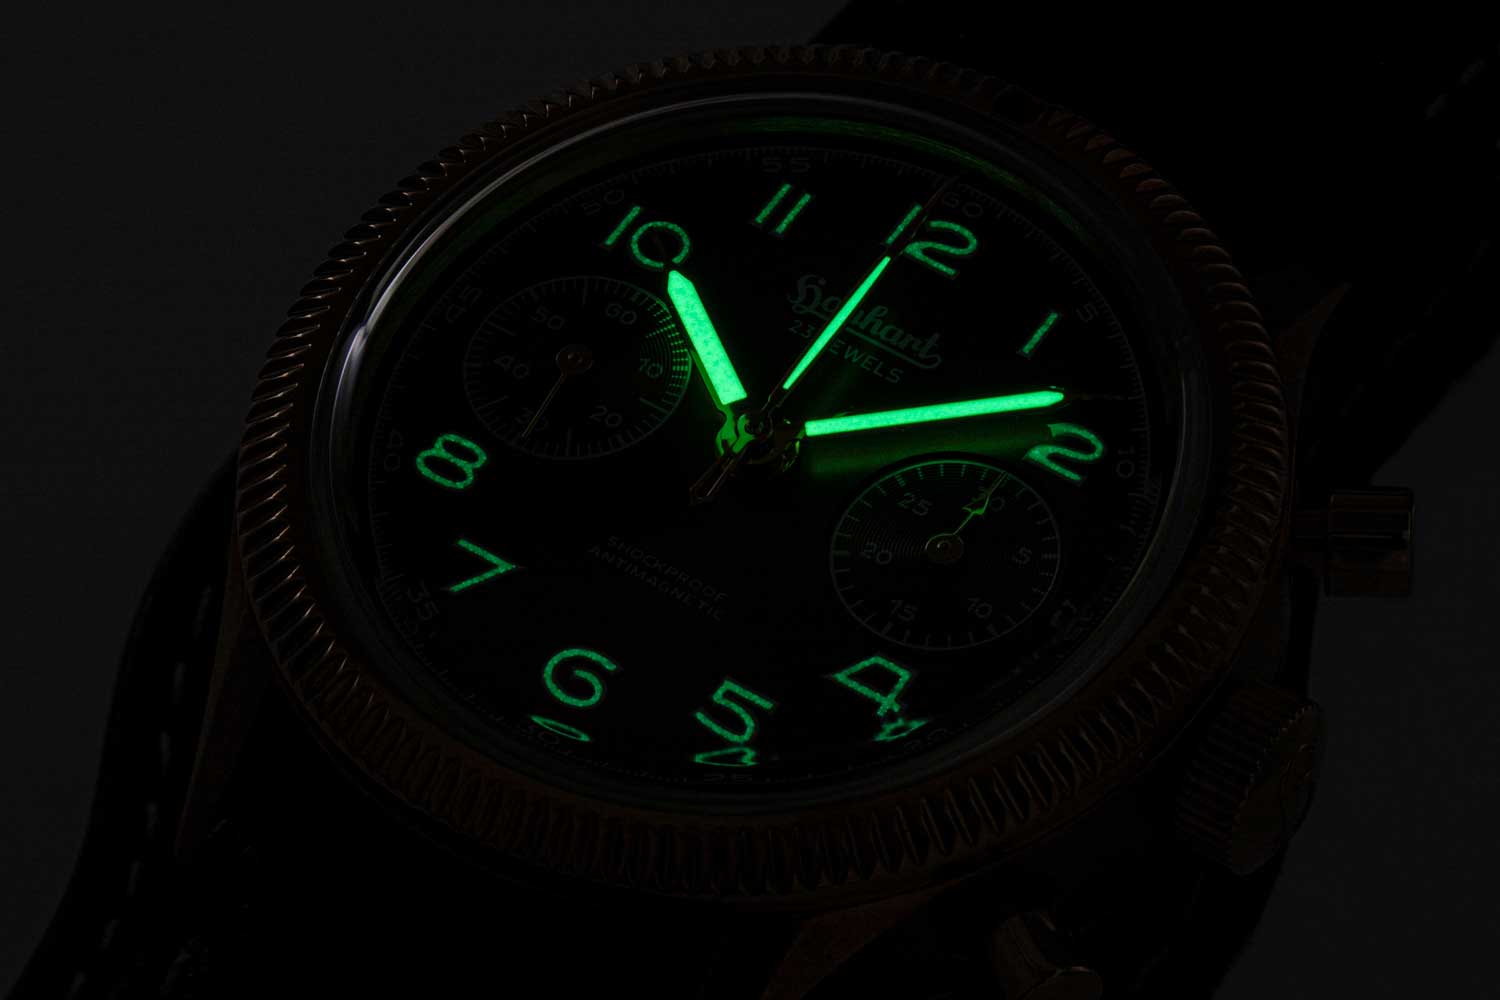 The hour markers and hands are rendered in BGW9 Super-LumiNova for top visibility in the dark (© Revolution)